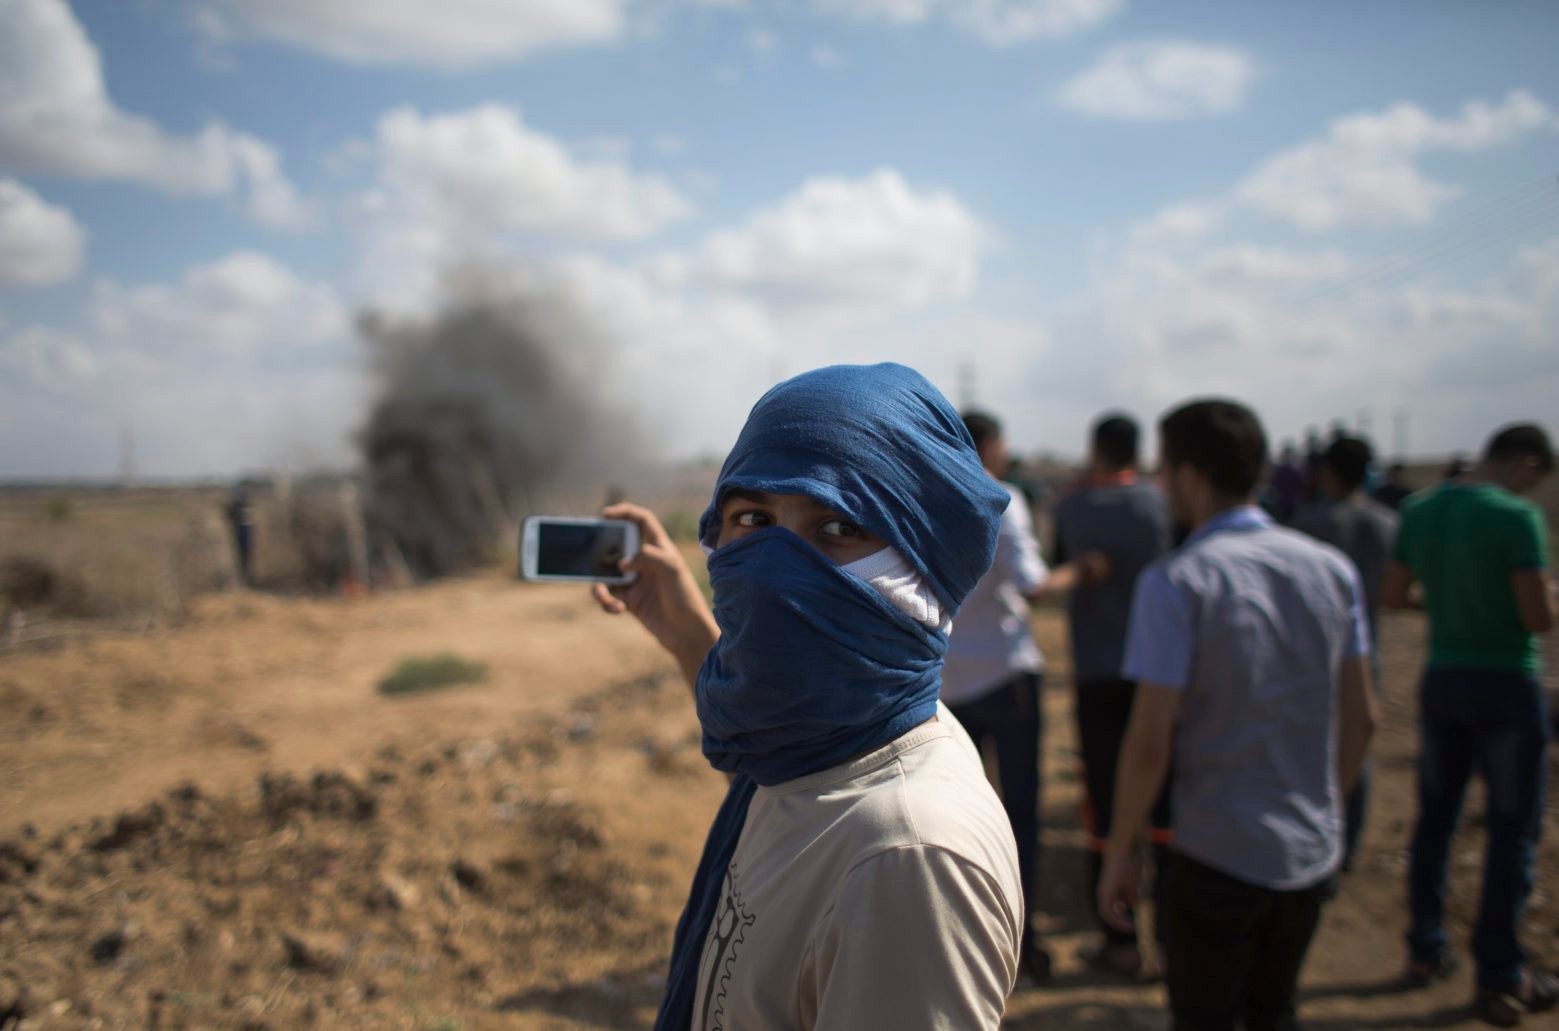 A Palestinian protester films with his mobile phone, during clashes with Israeli soldiers on the Israeli border Eastern Gaza City, Friday, Oct. 9, 2015. At least four attacks ó three by Palestinians and one by an Israeli ó as well as deadly clashes along the Gaza border threatened to escalate tensions throughout the country on Friday as Israel struggled to control spiraling violence. (AP Photo/Khalil Hamra) APTOPIX Mideast Israeli Palestinians